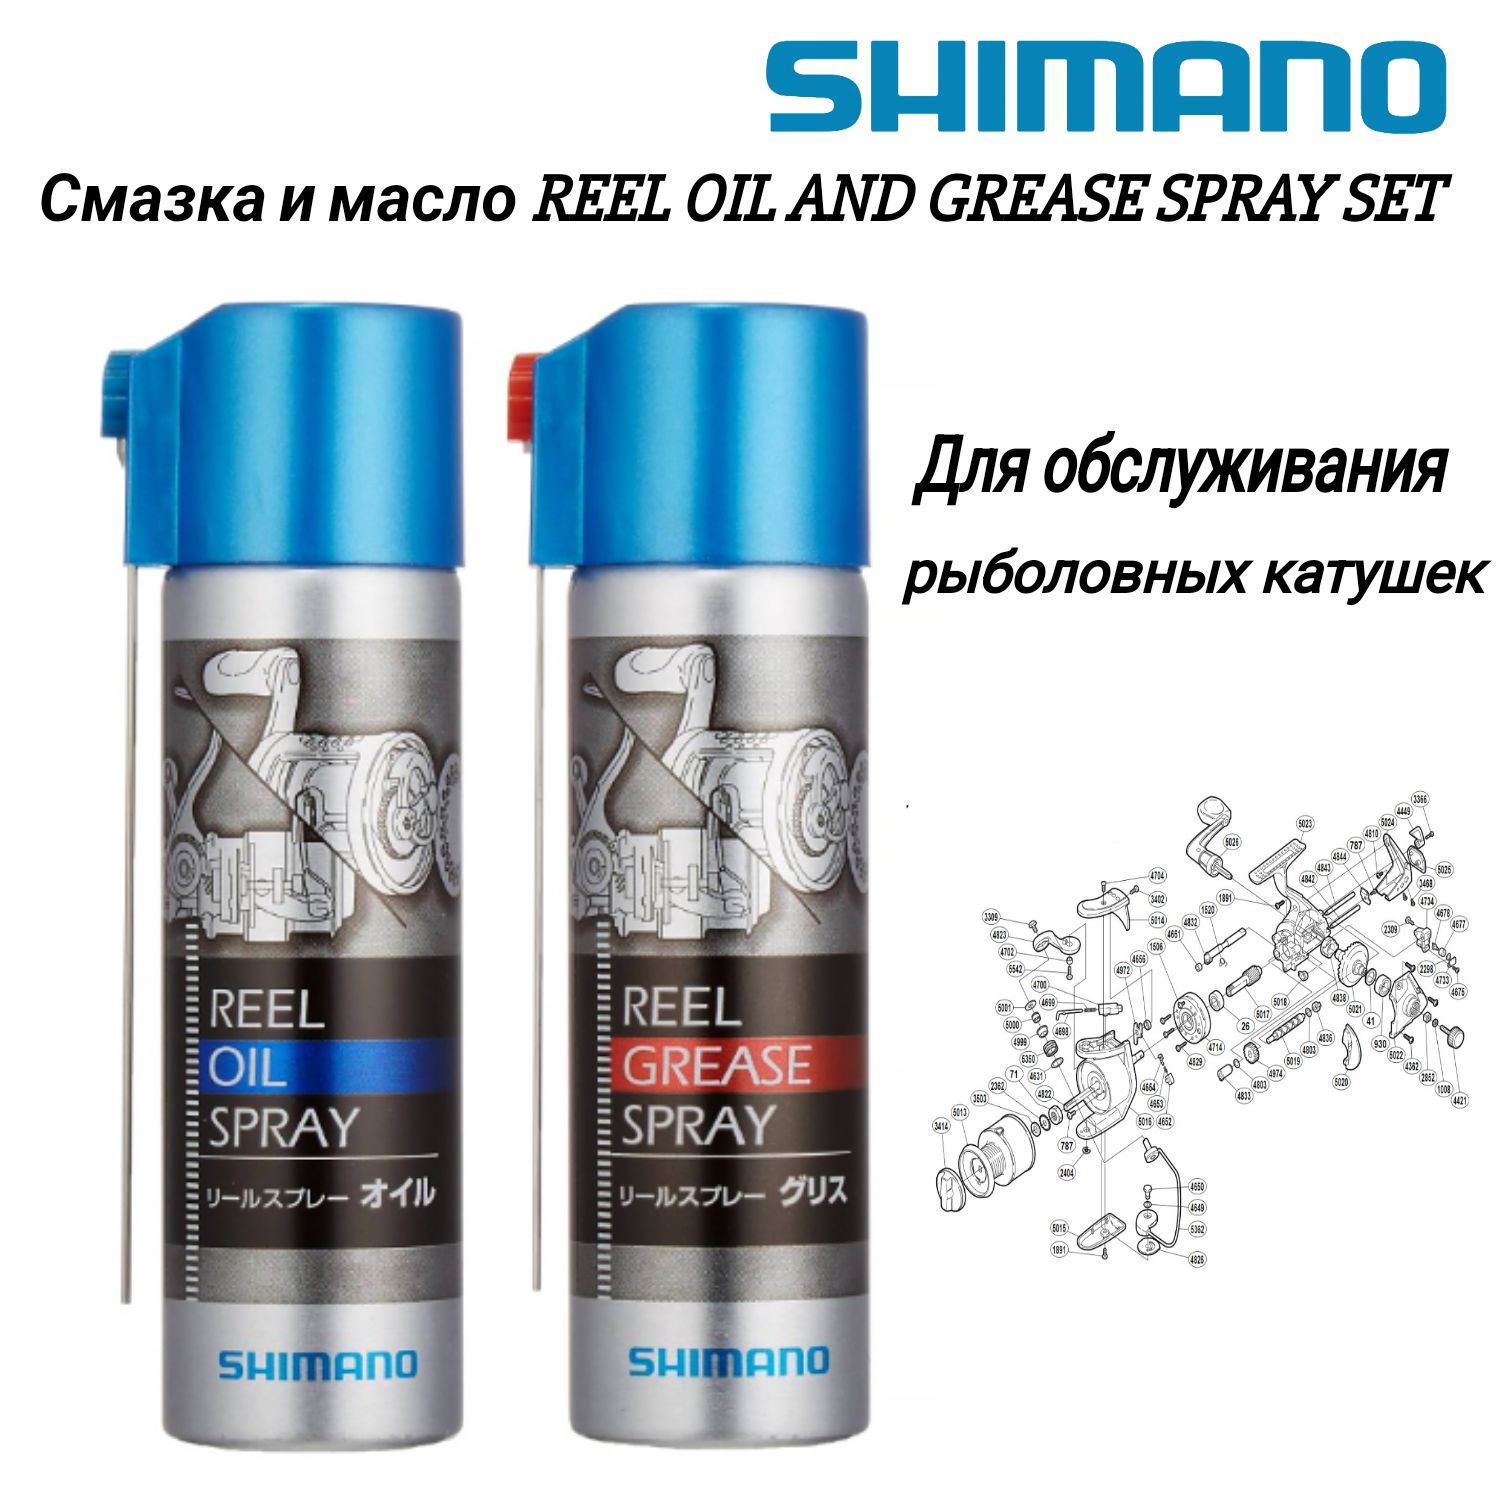 Смазка и масло SHIMANO REEL OIL AND GREASE SPRAY SET для